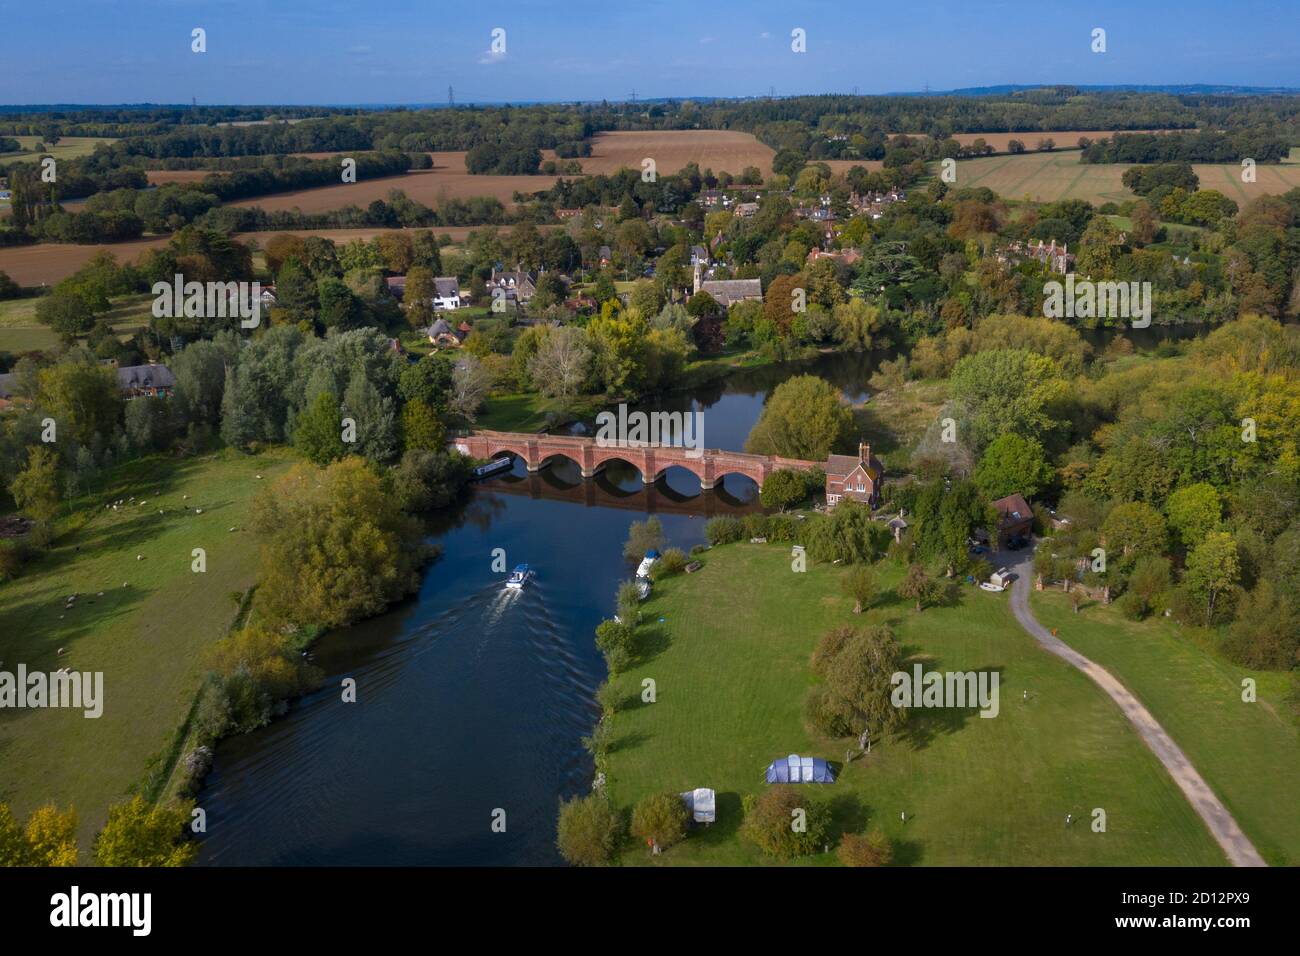 Thames River and Bridge with Village of Clifton Hamden, Oxfordshire Stock Photo